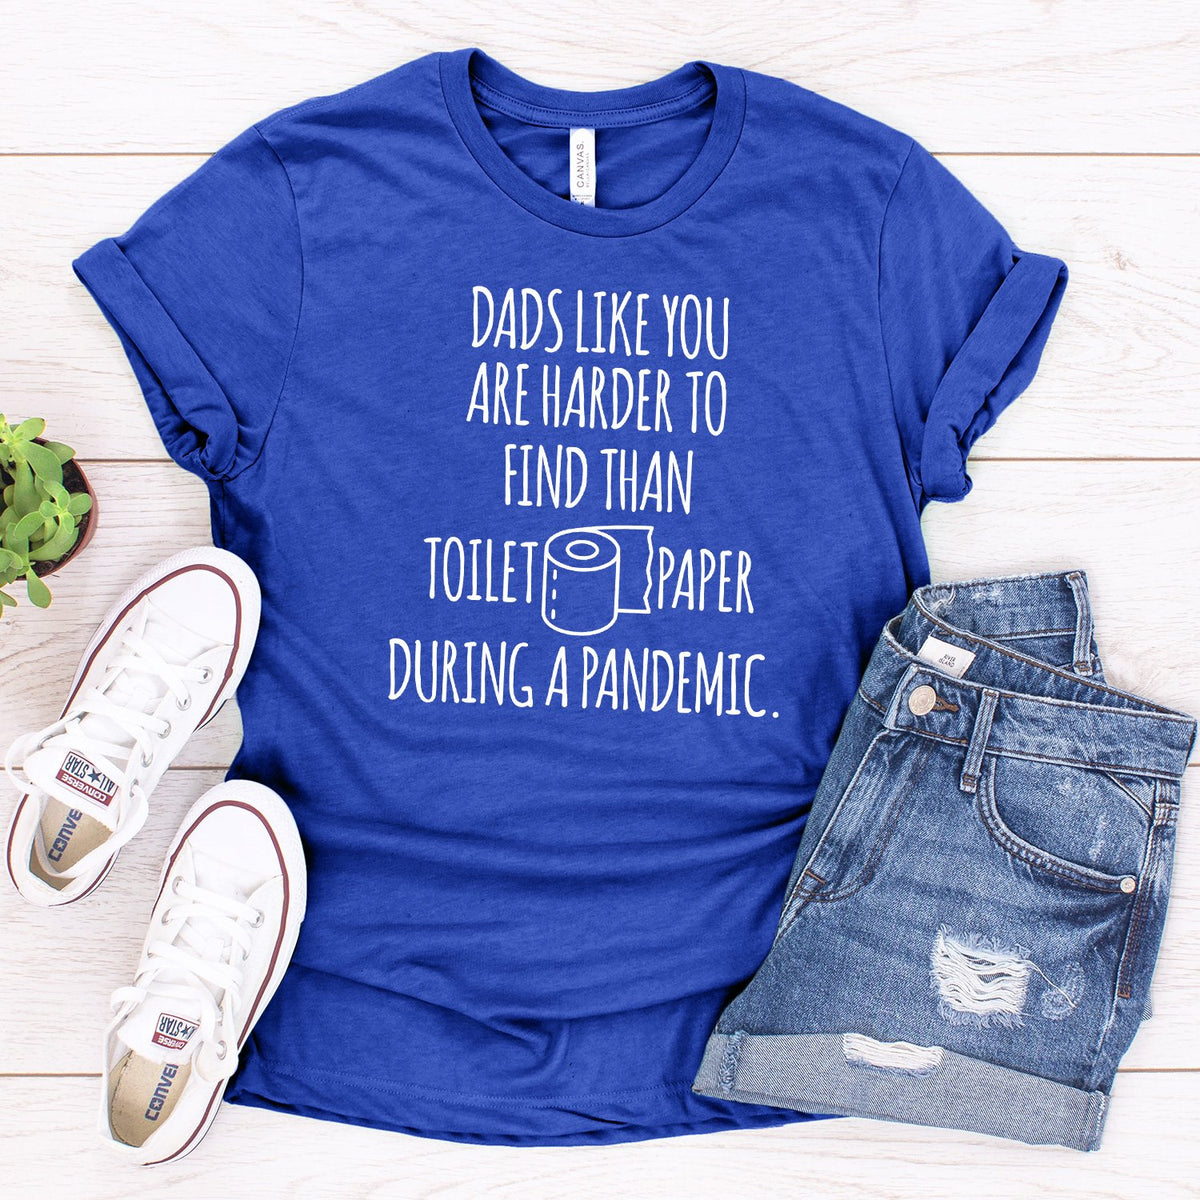 Dads Like You Are Harder to Find Than Toilet Paper During A Pandemic - Short Sleeve Tee Shirt